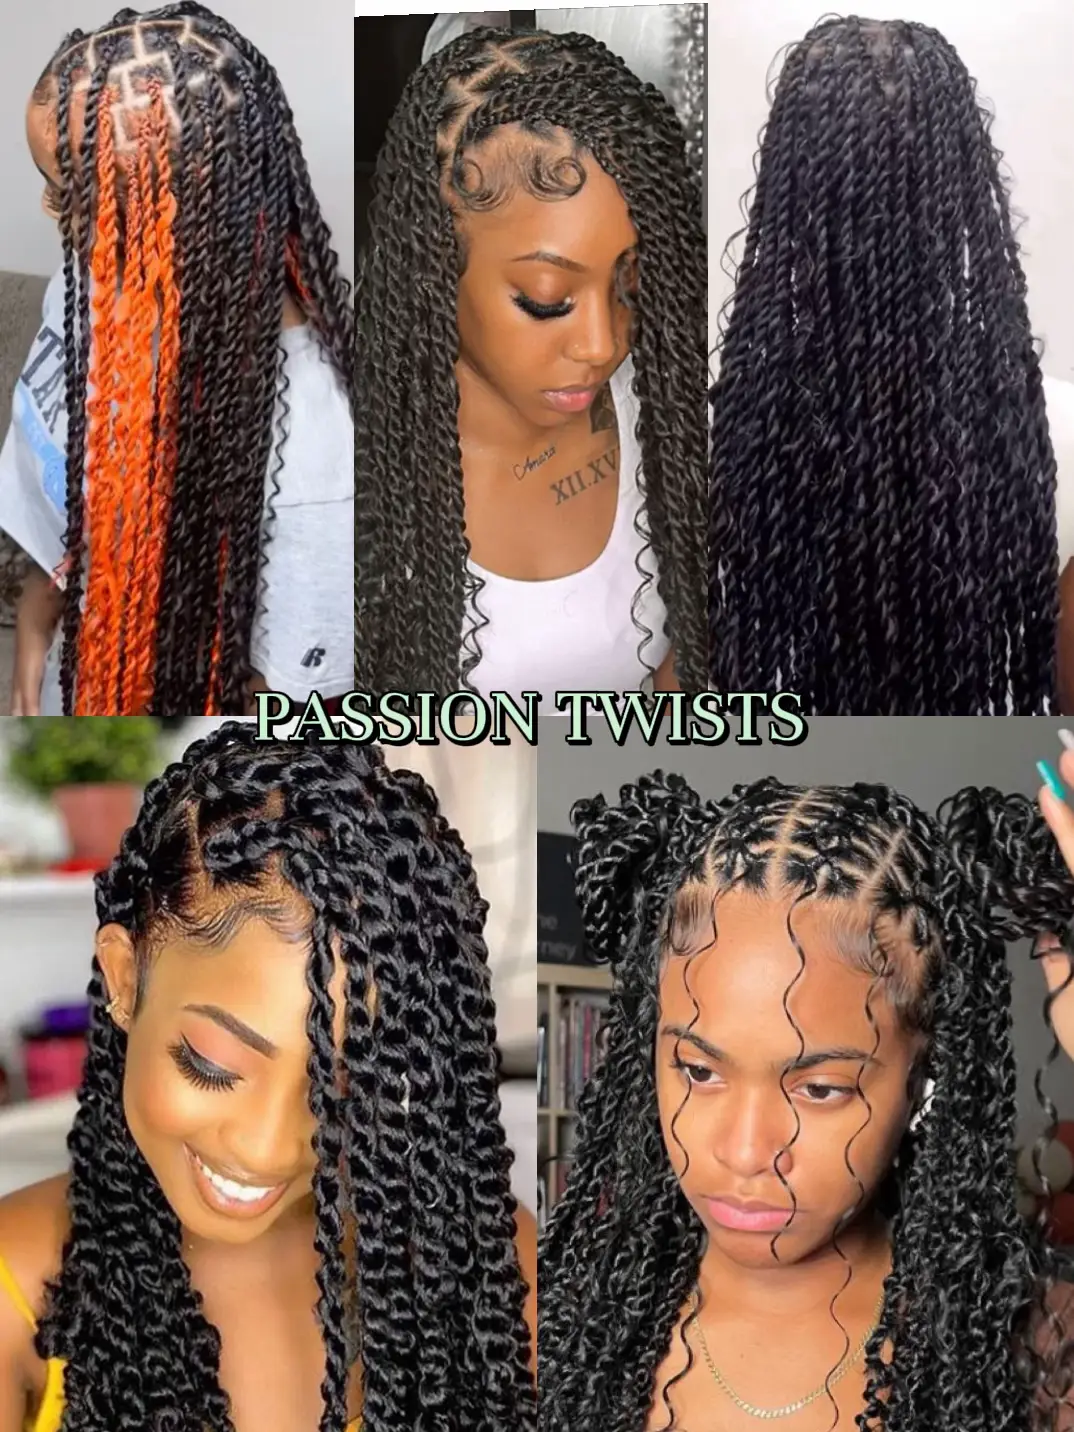 Six Twenty Seven: Where to go for Knotless Box Braids in Seattle